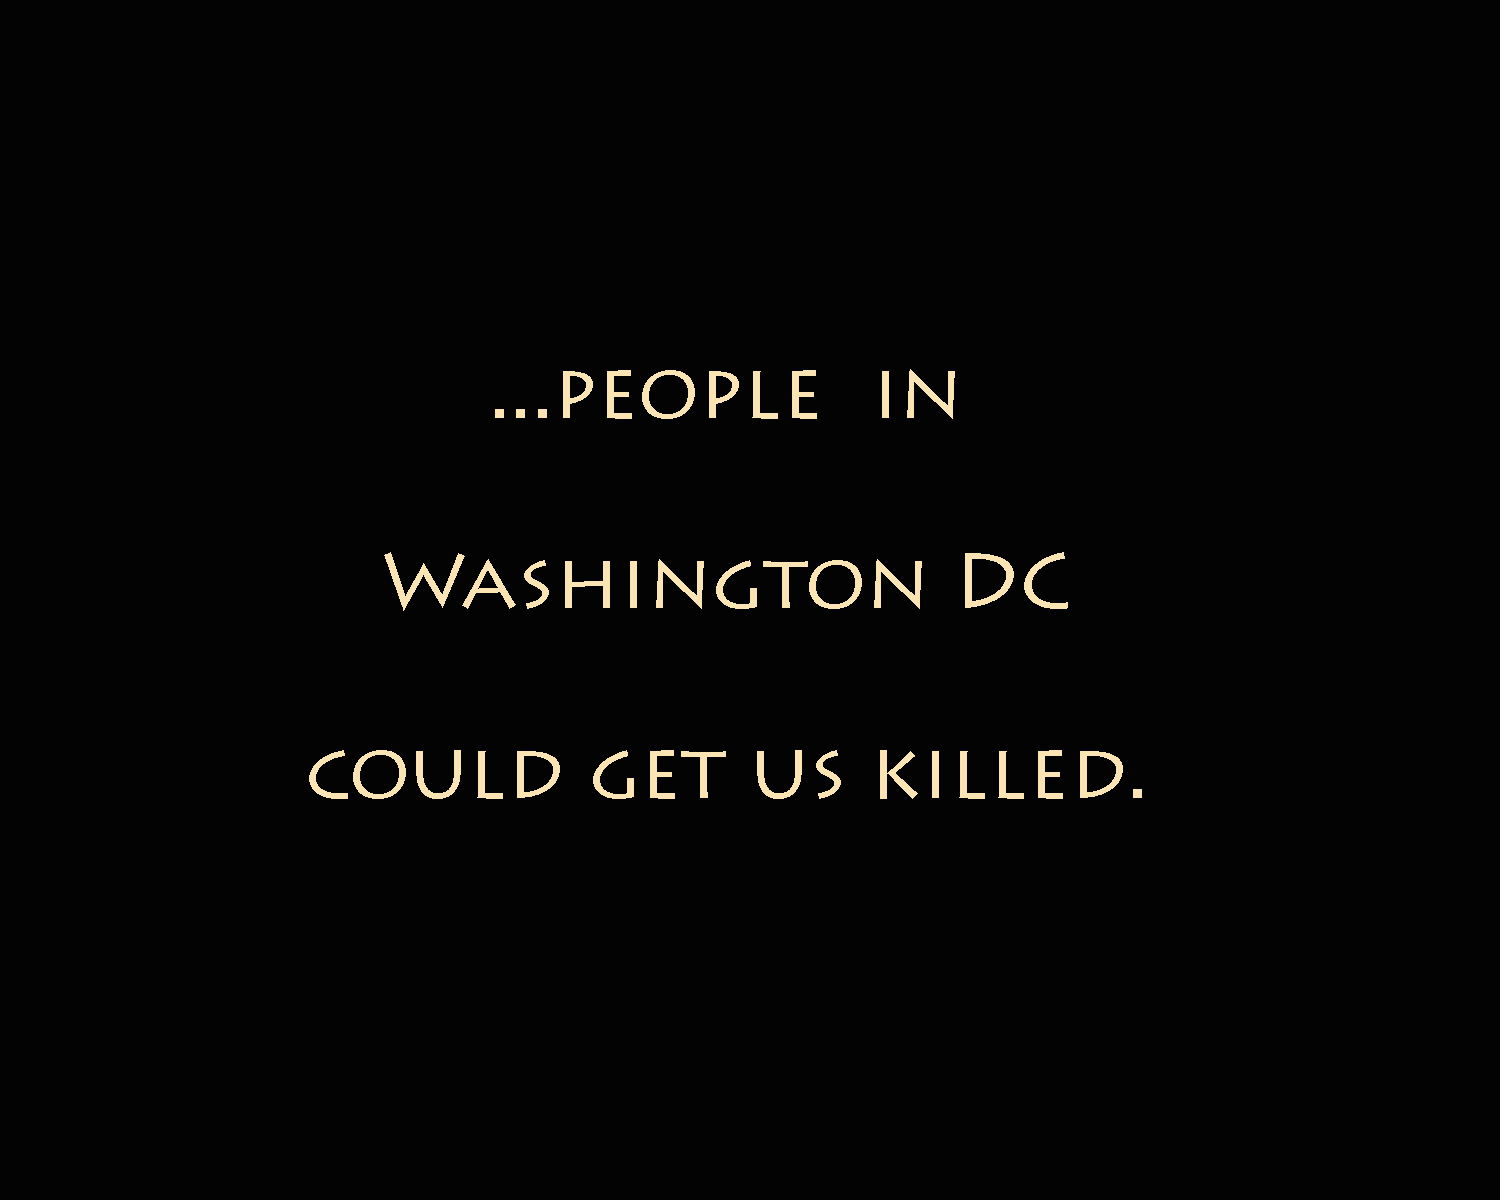 People in DC